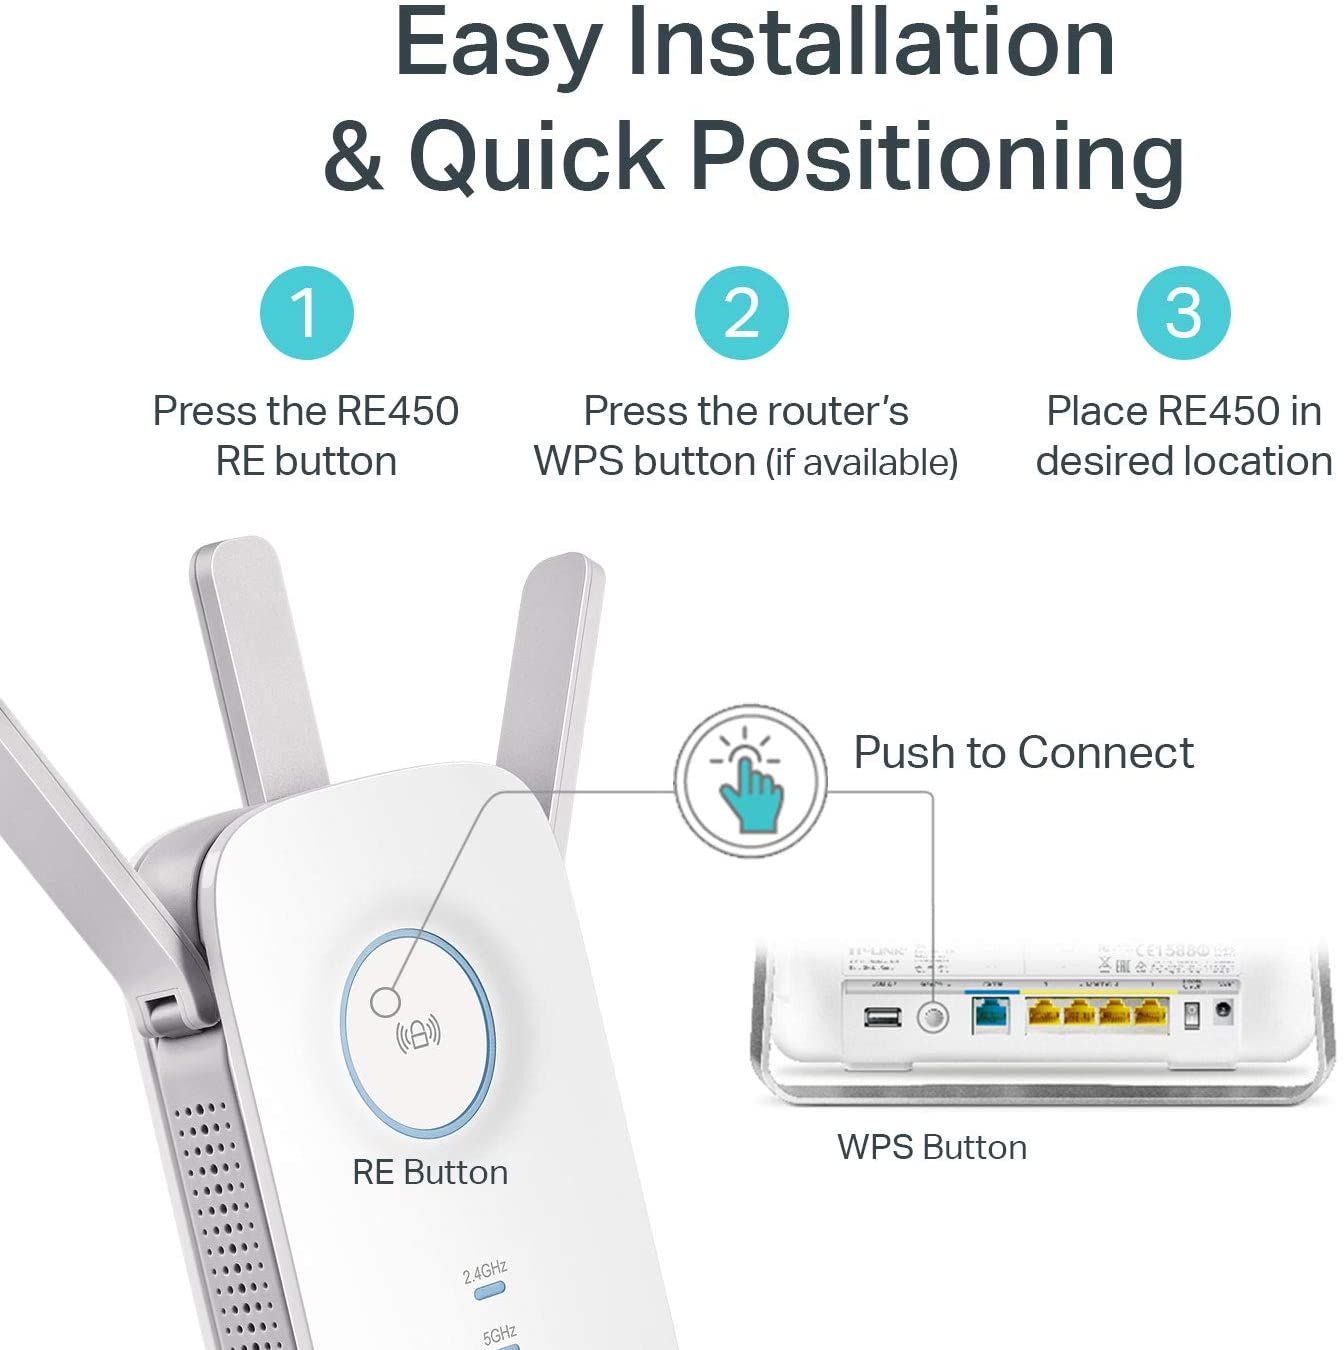 TP-Link AC1750 WiFi Extender (RE450) easy installation